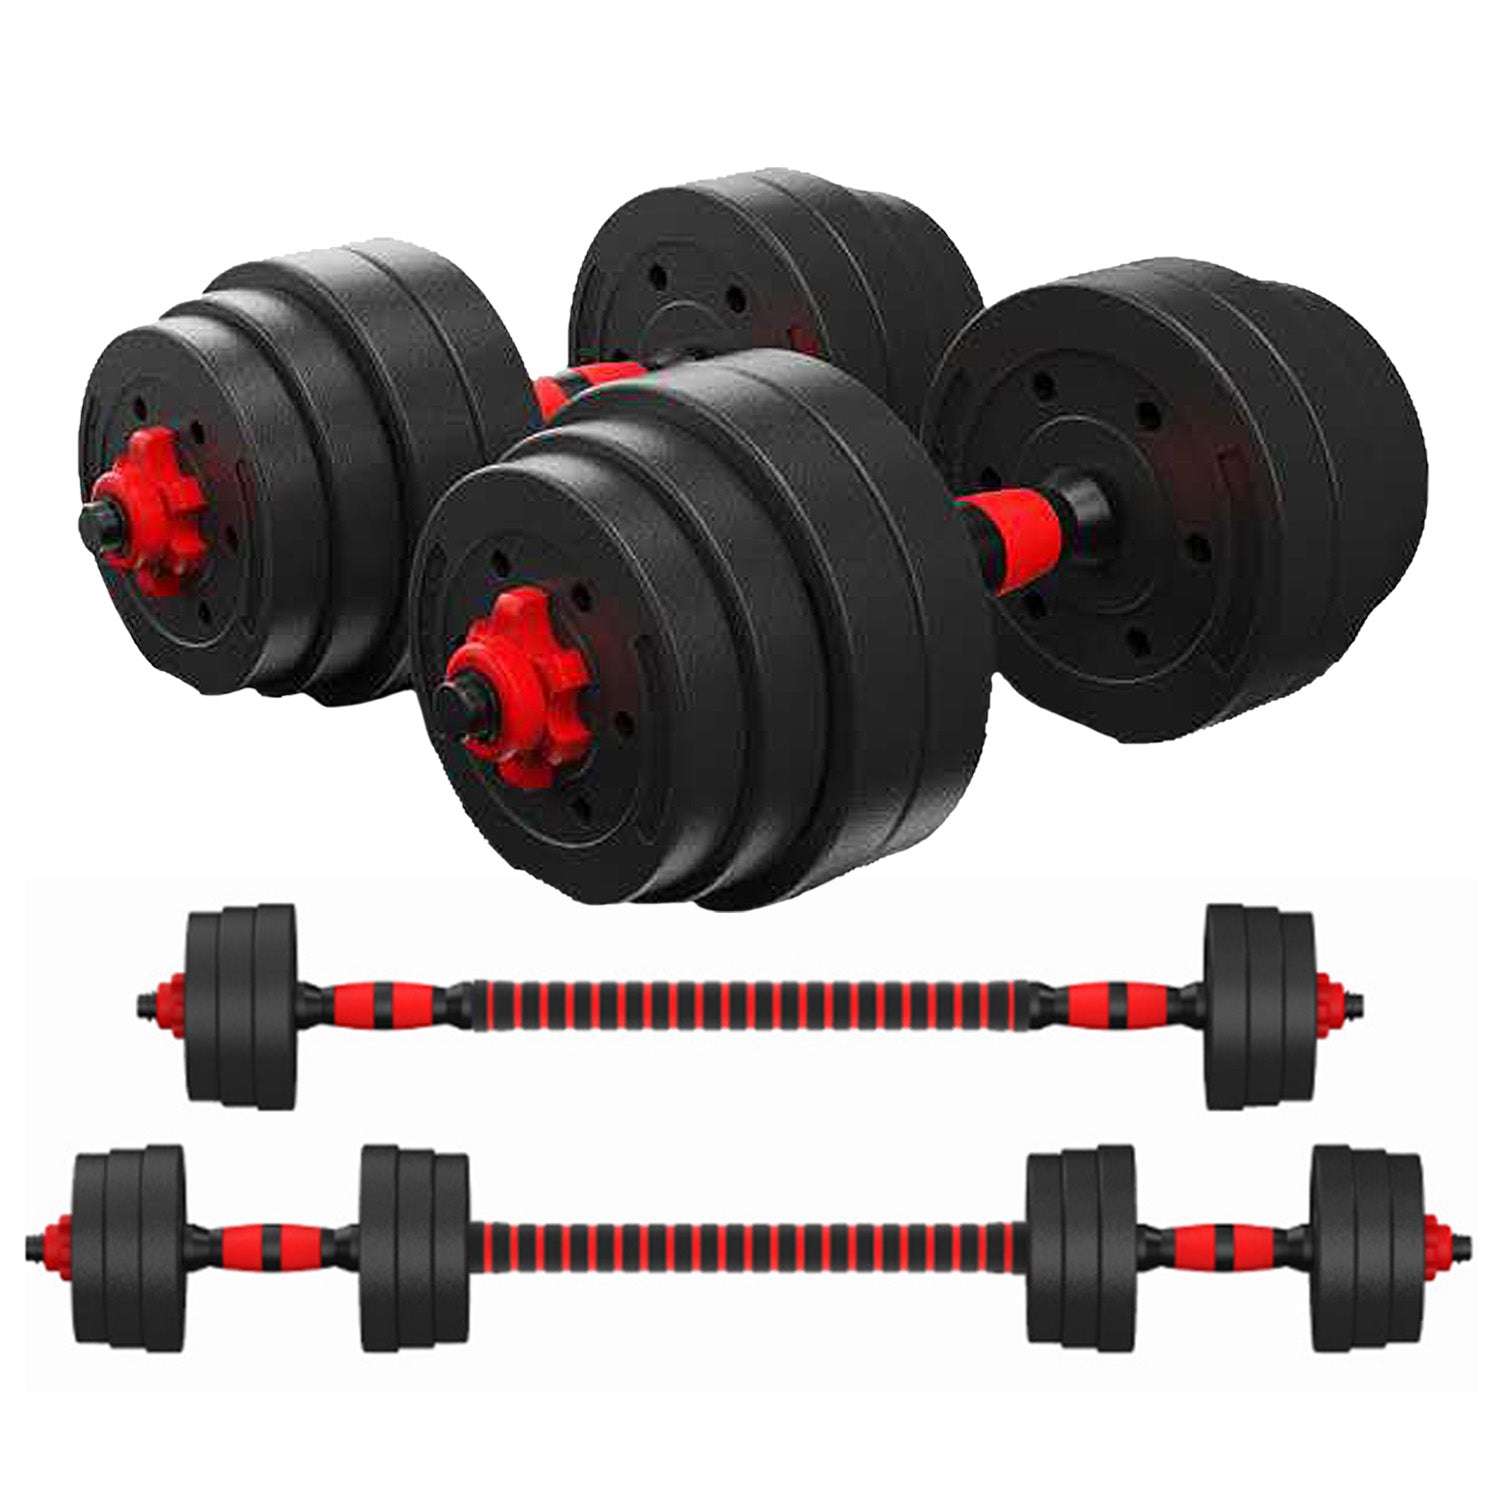 30kg weight pair for home fitness